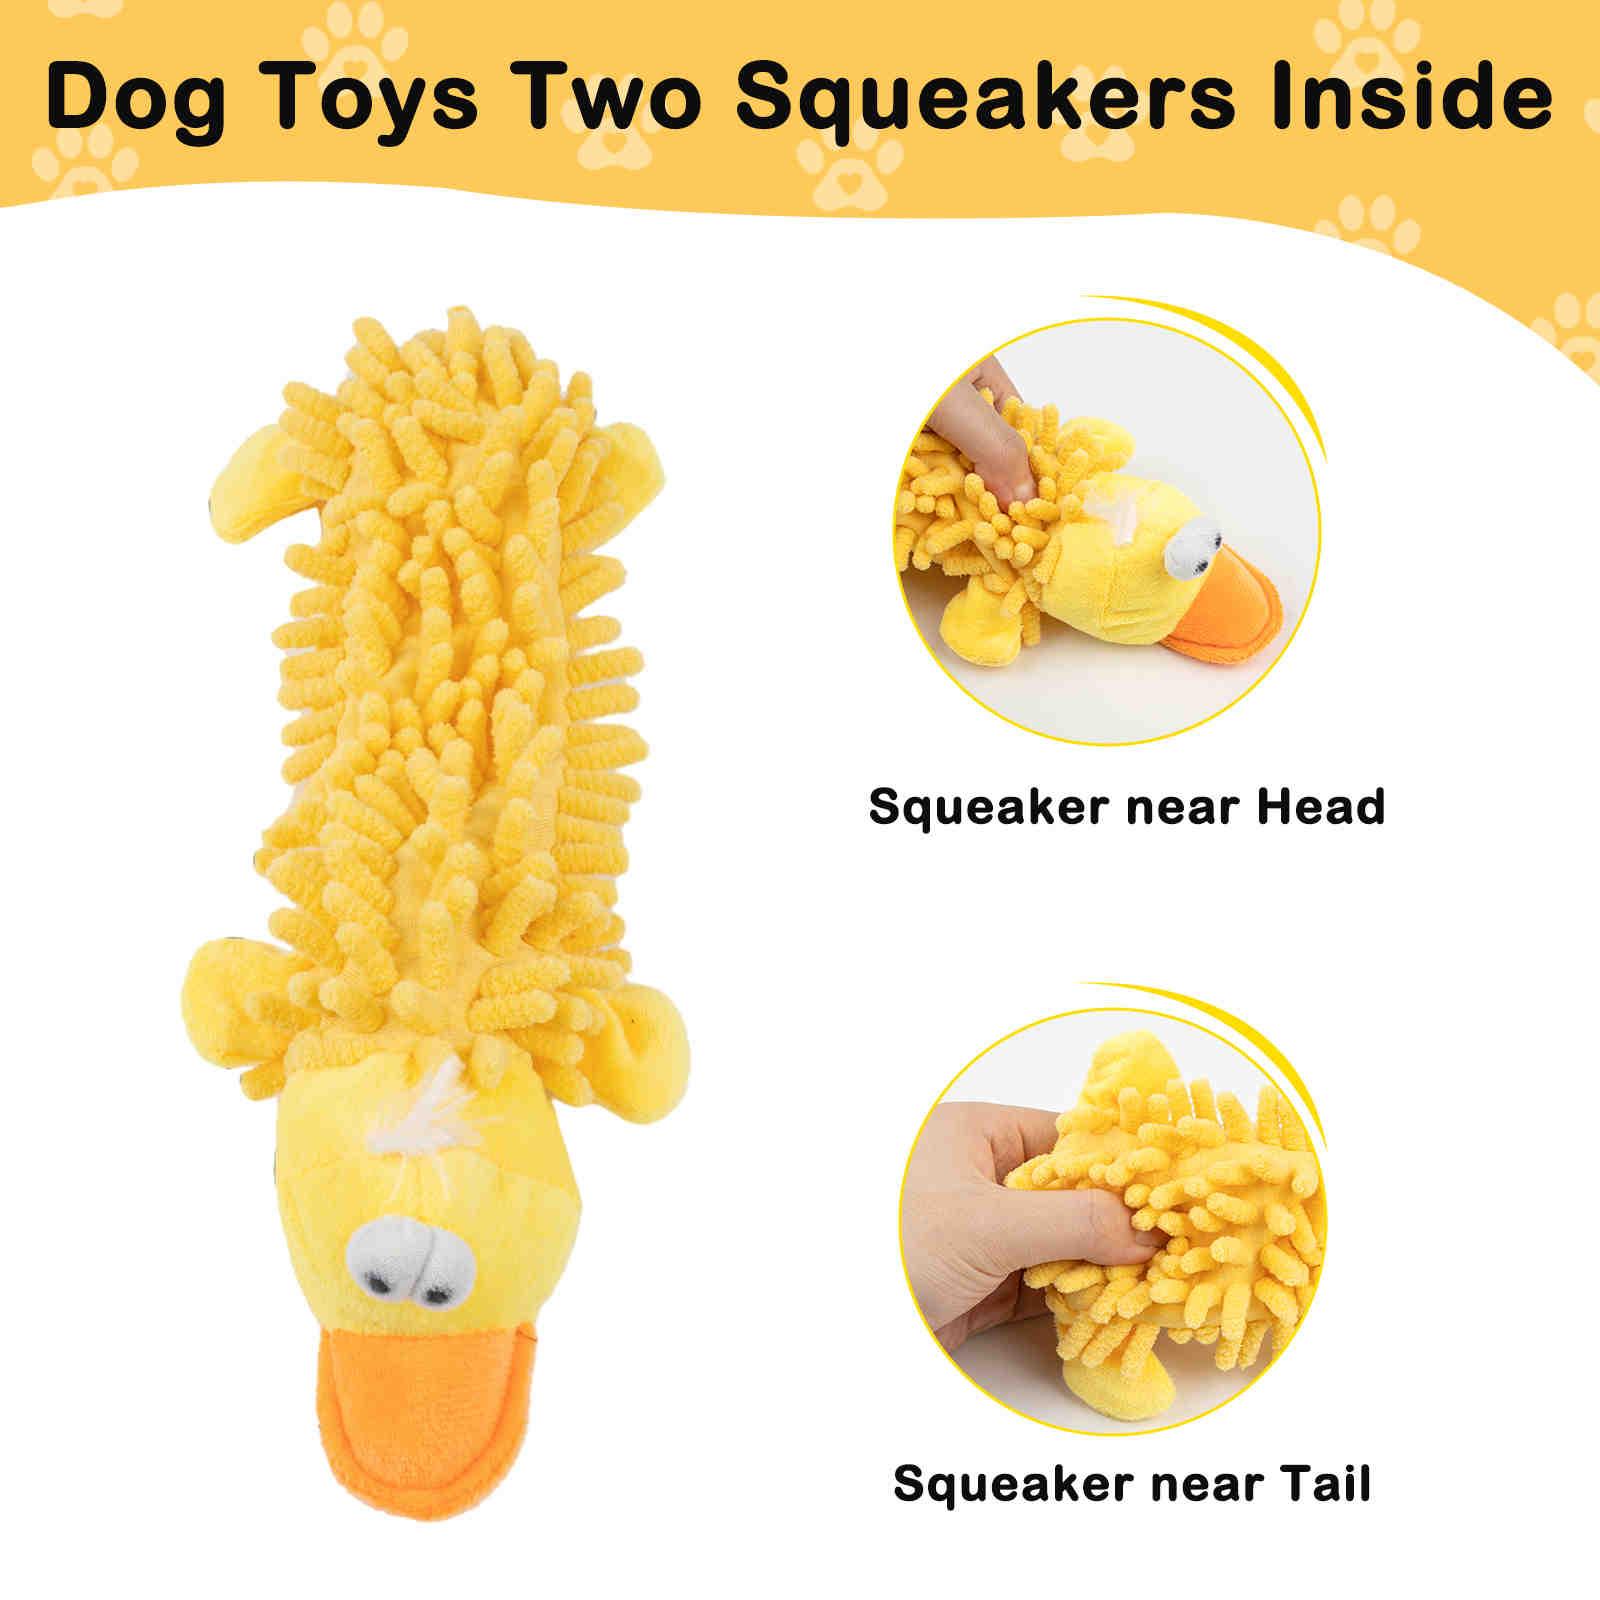 Dog Squeaky Toys Plush Dog Chew Toys, 6 Pack - Petsoft